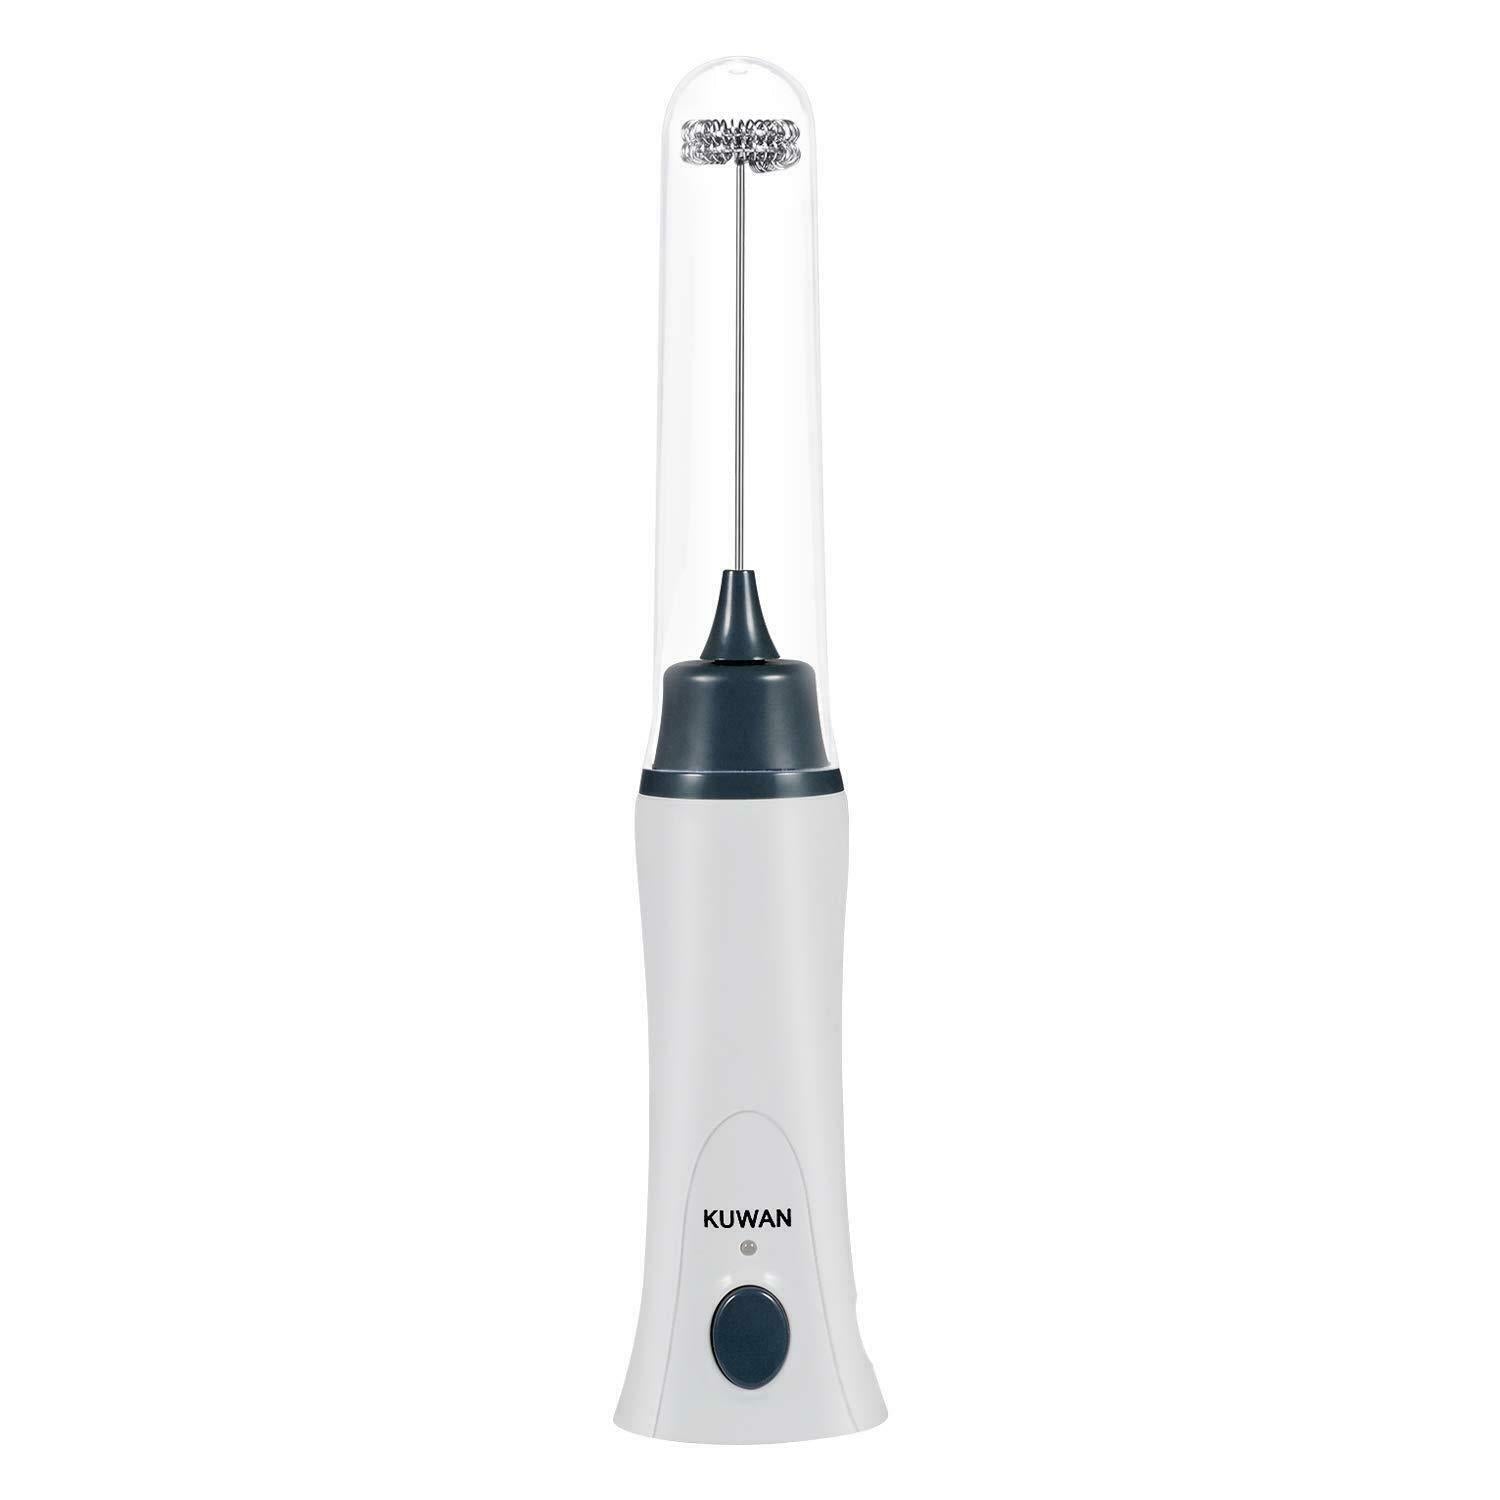 Electric Milk Frother Rechargeable Handheld Wand Coffee Mixer In Pakistan